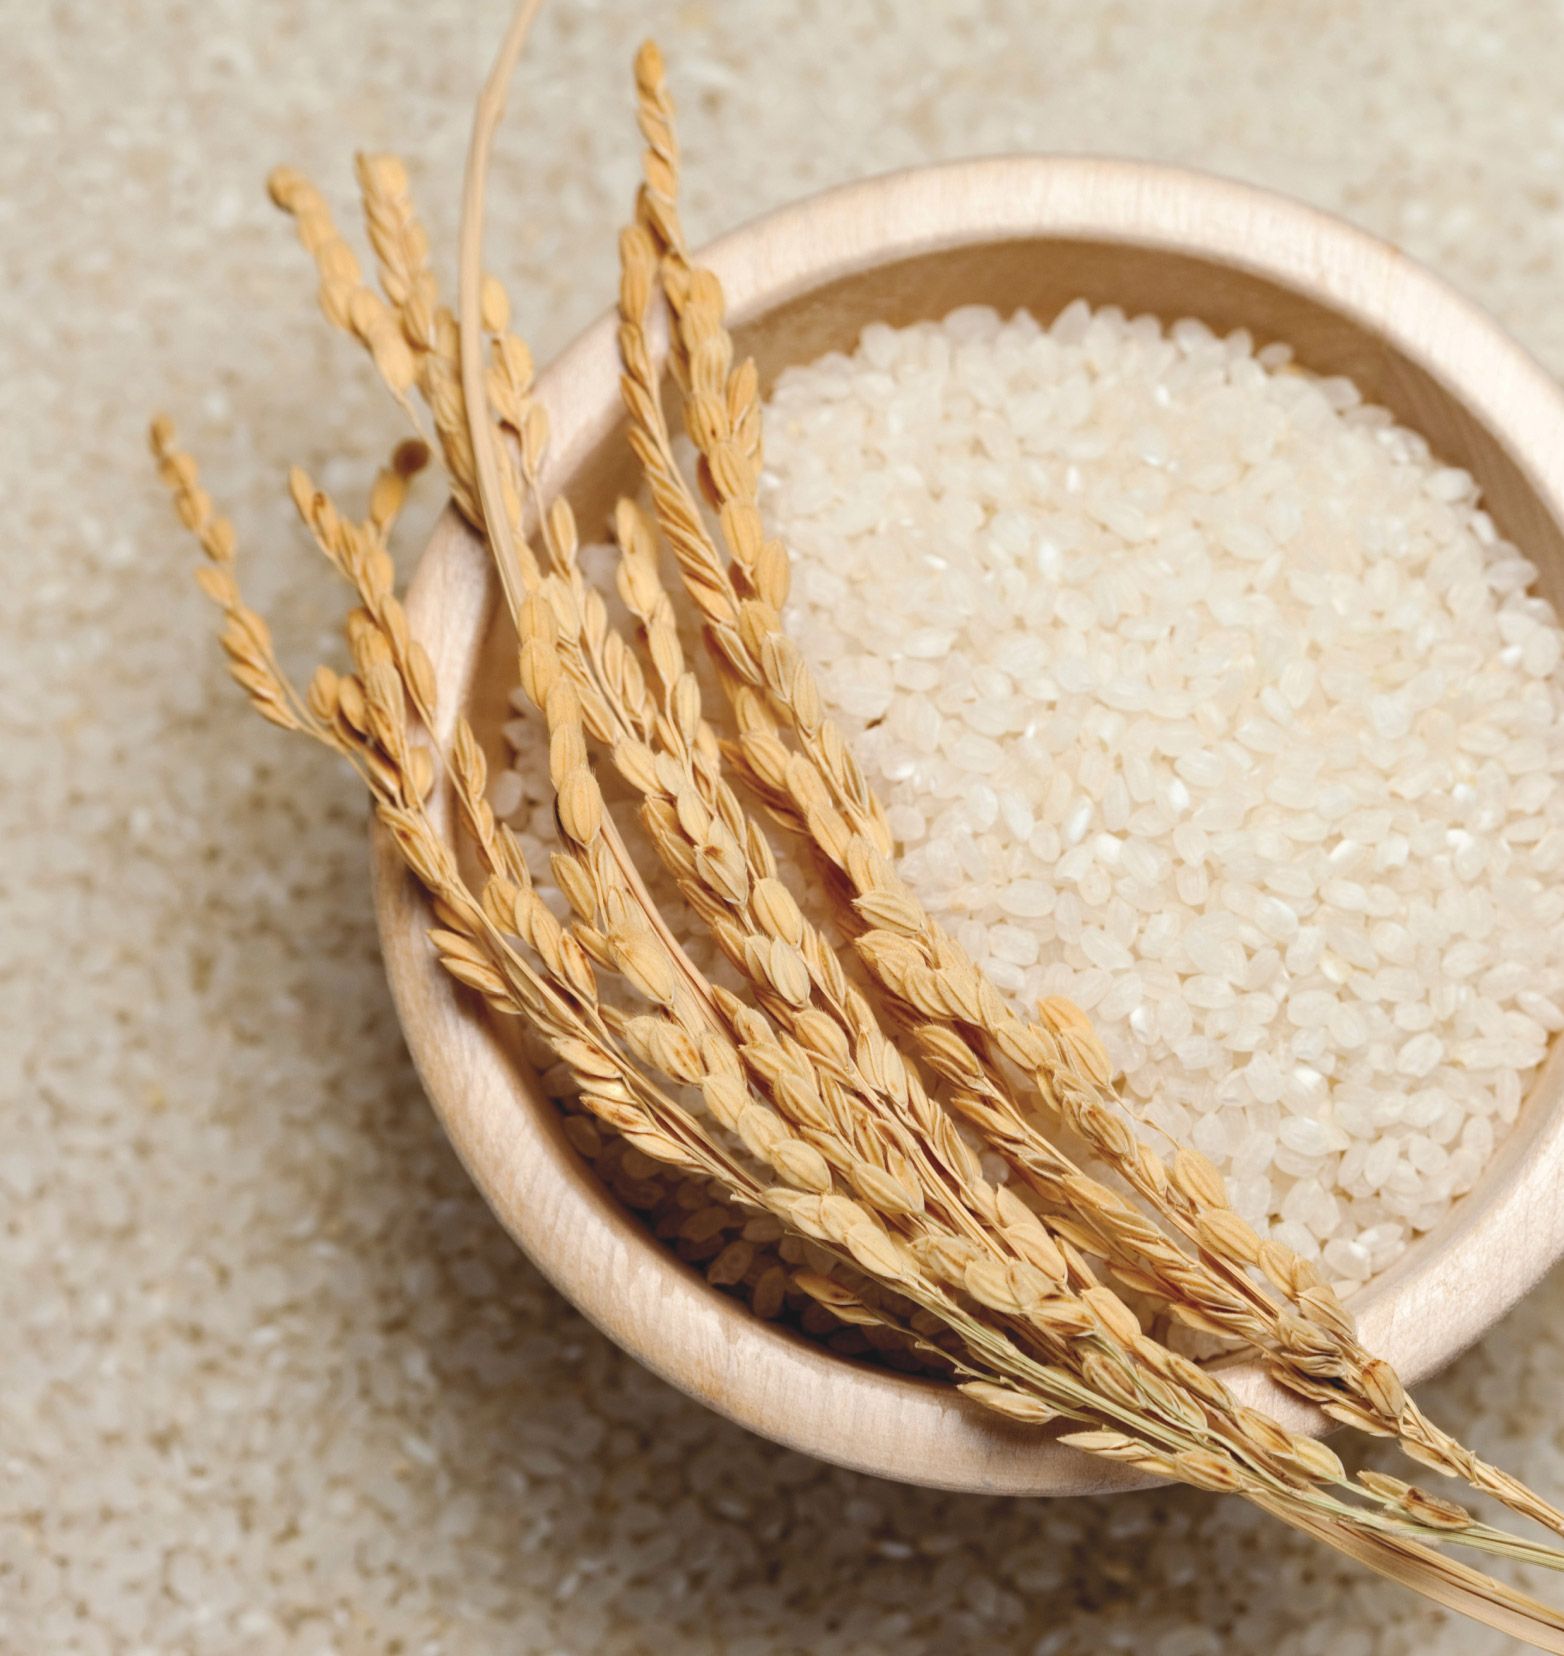 A surface full of grains of rice under a small white bowl of rice, with rice grain plant on top.